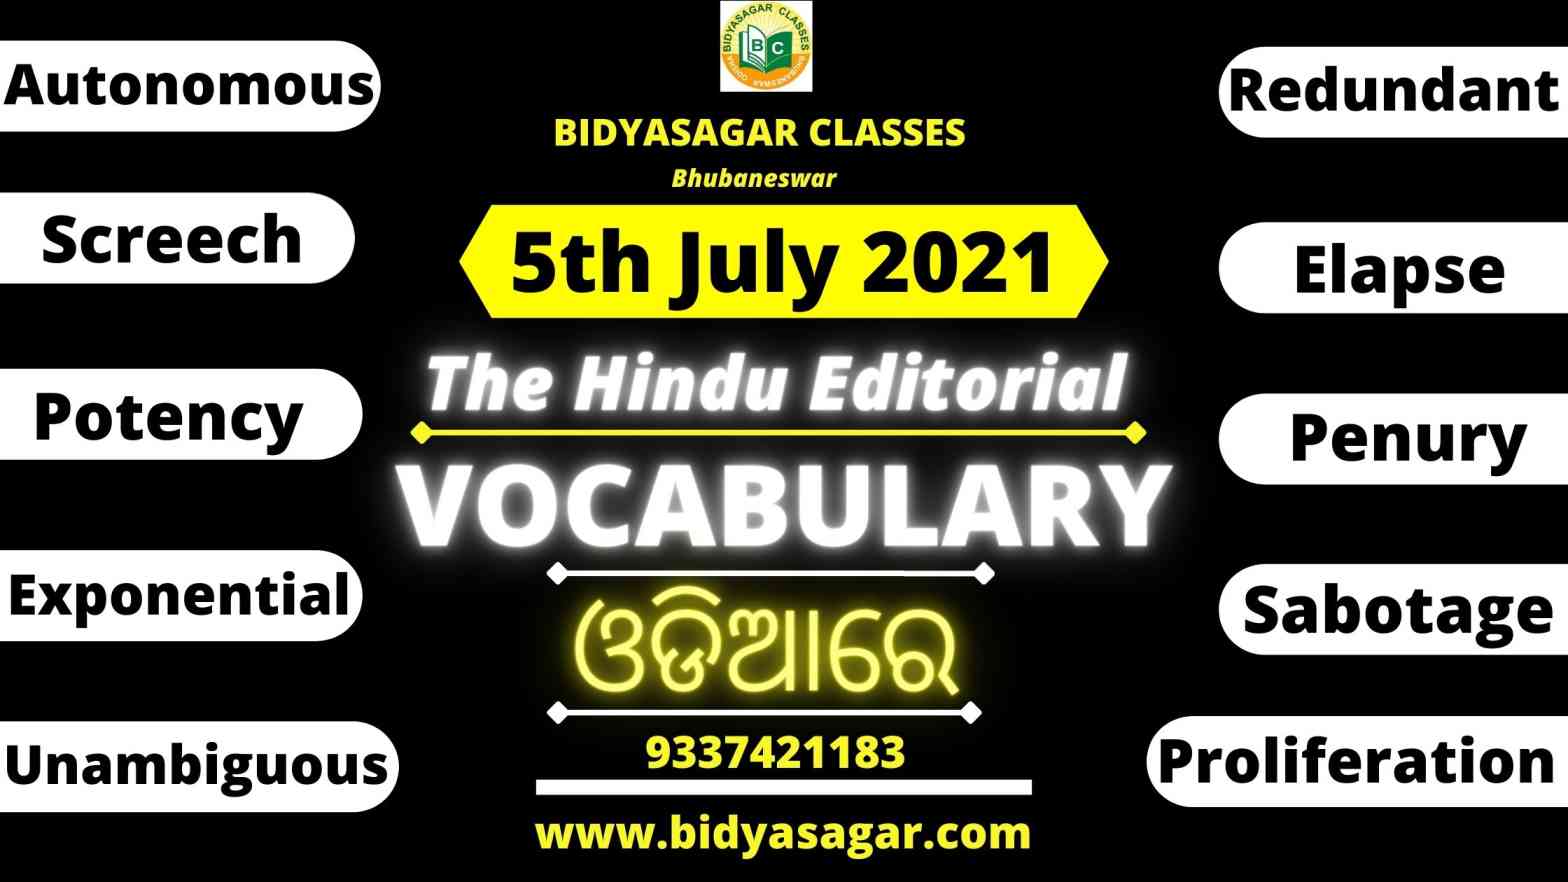 The Hindu Editorial Vocabulary of 5th July 2021